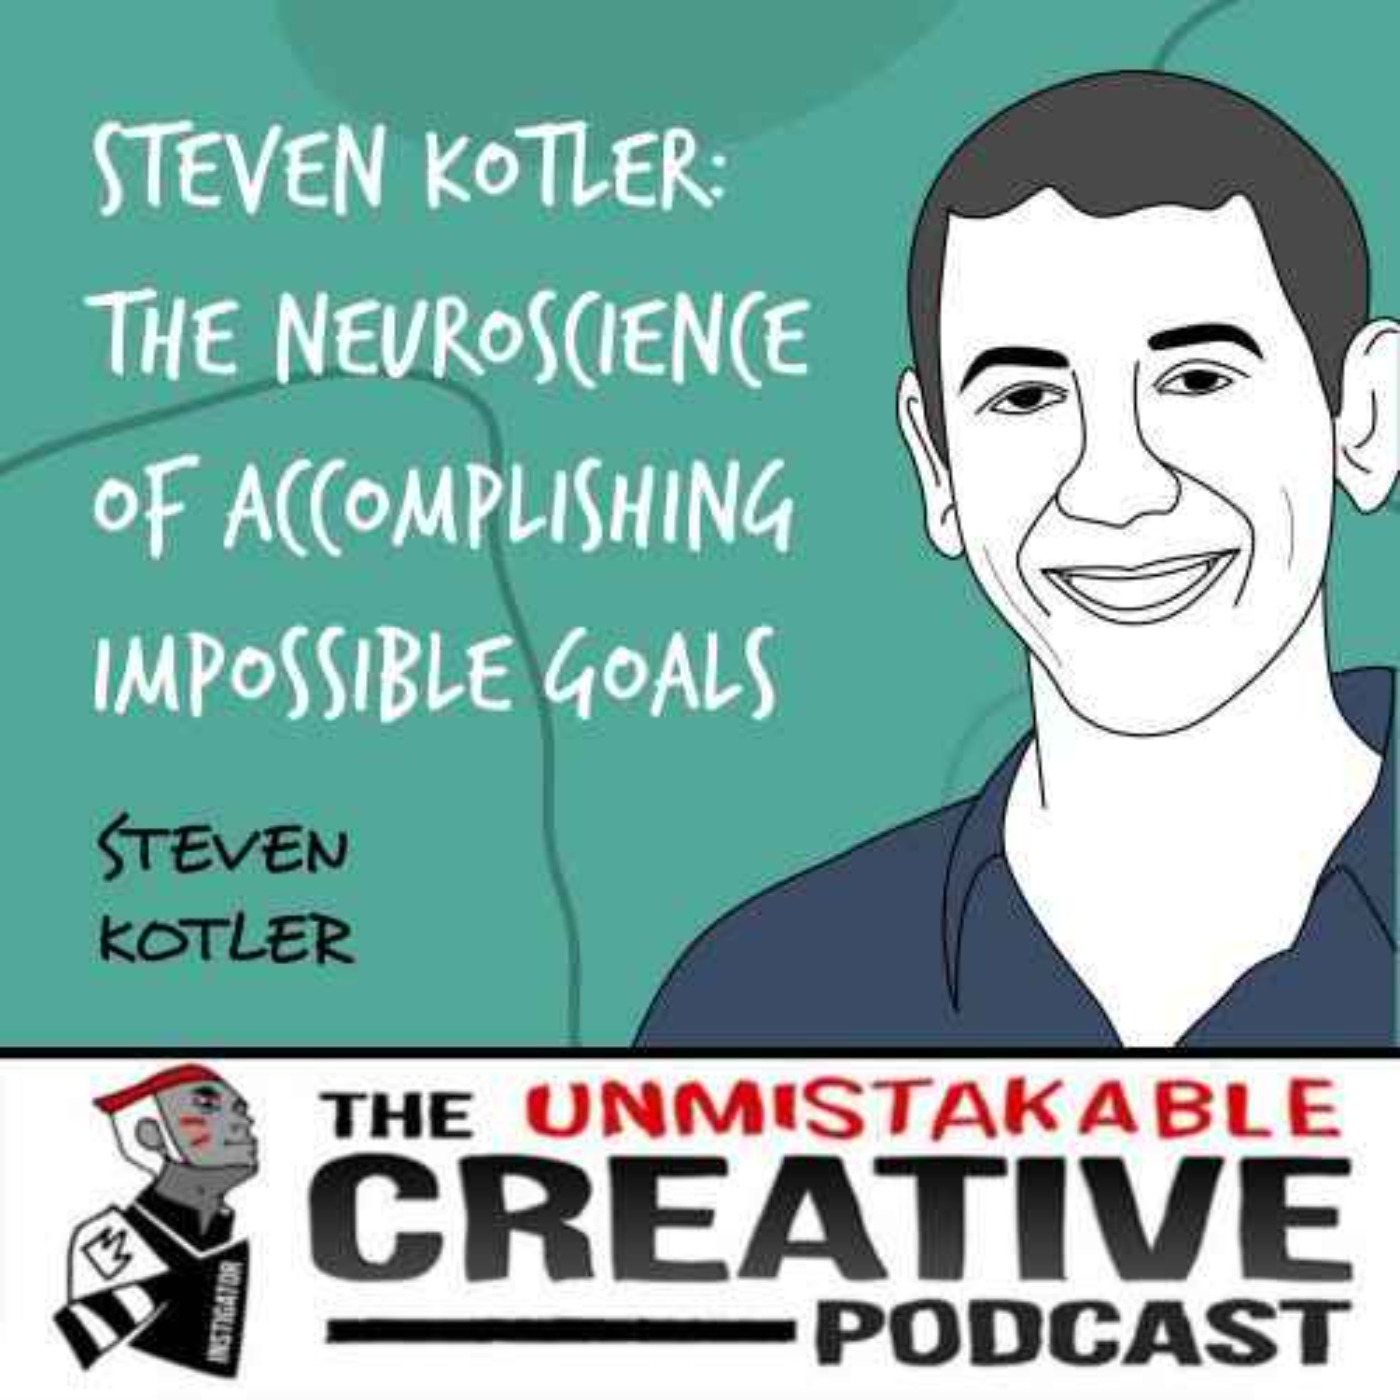 The Knowledge Management Series: Steven Kotler | The Neuroscience of Accomplishing Impossible Goals Image